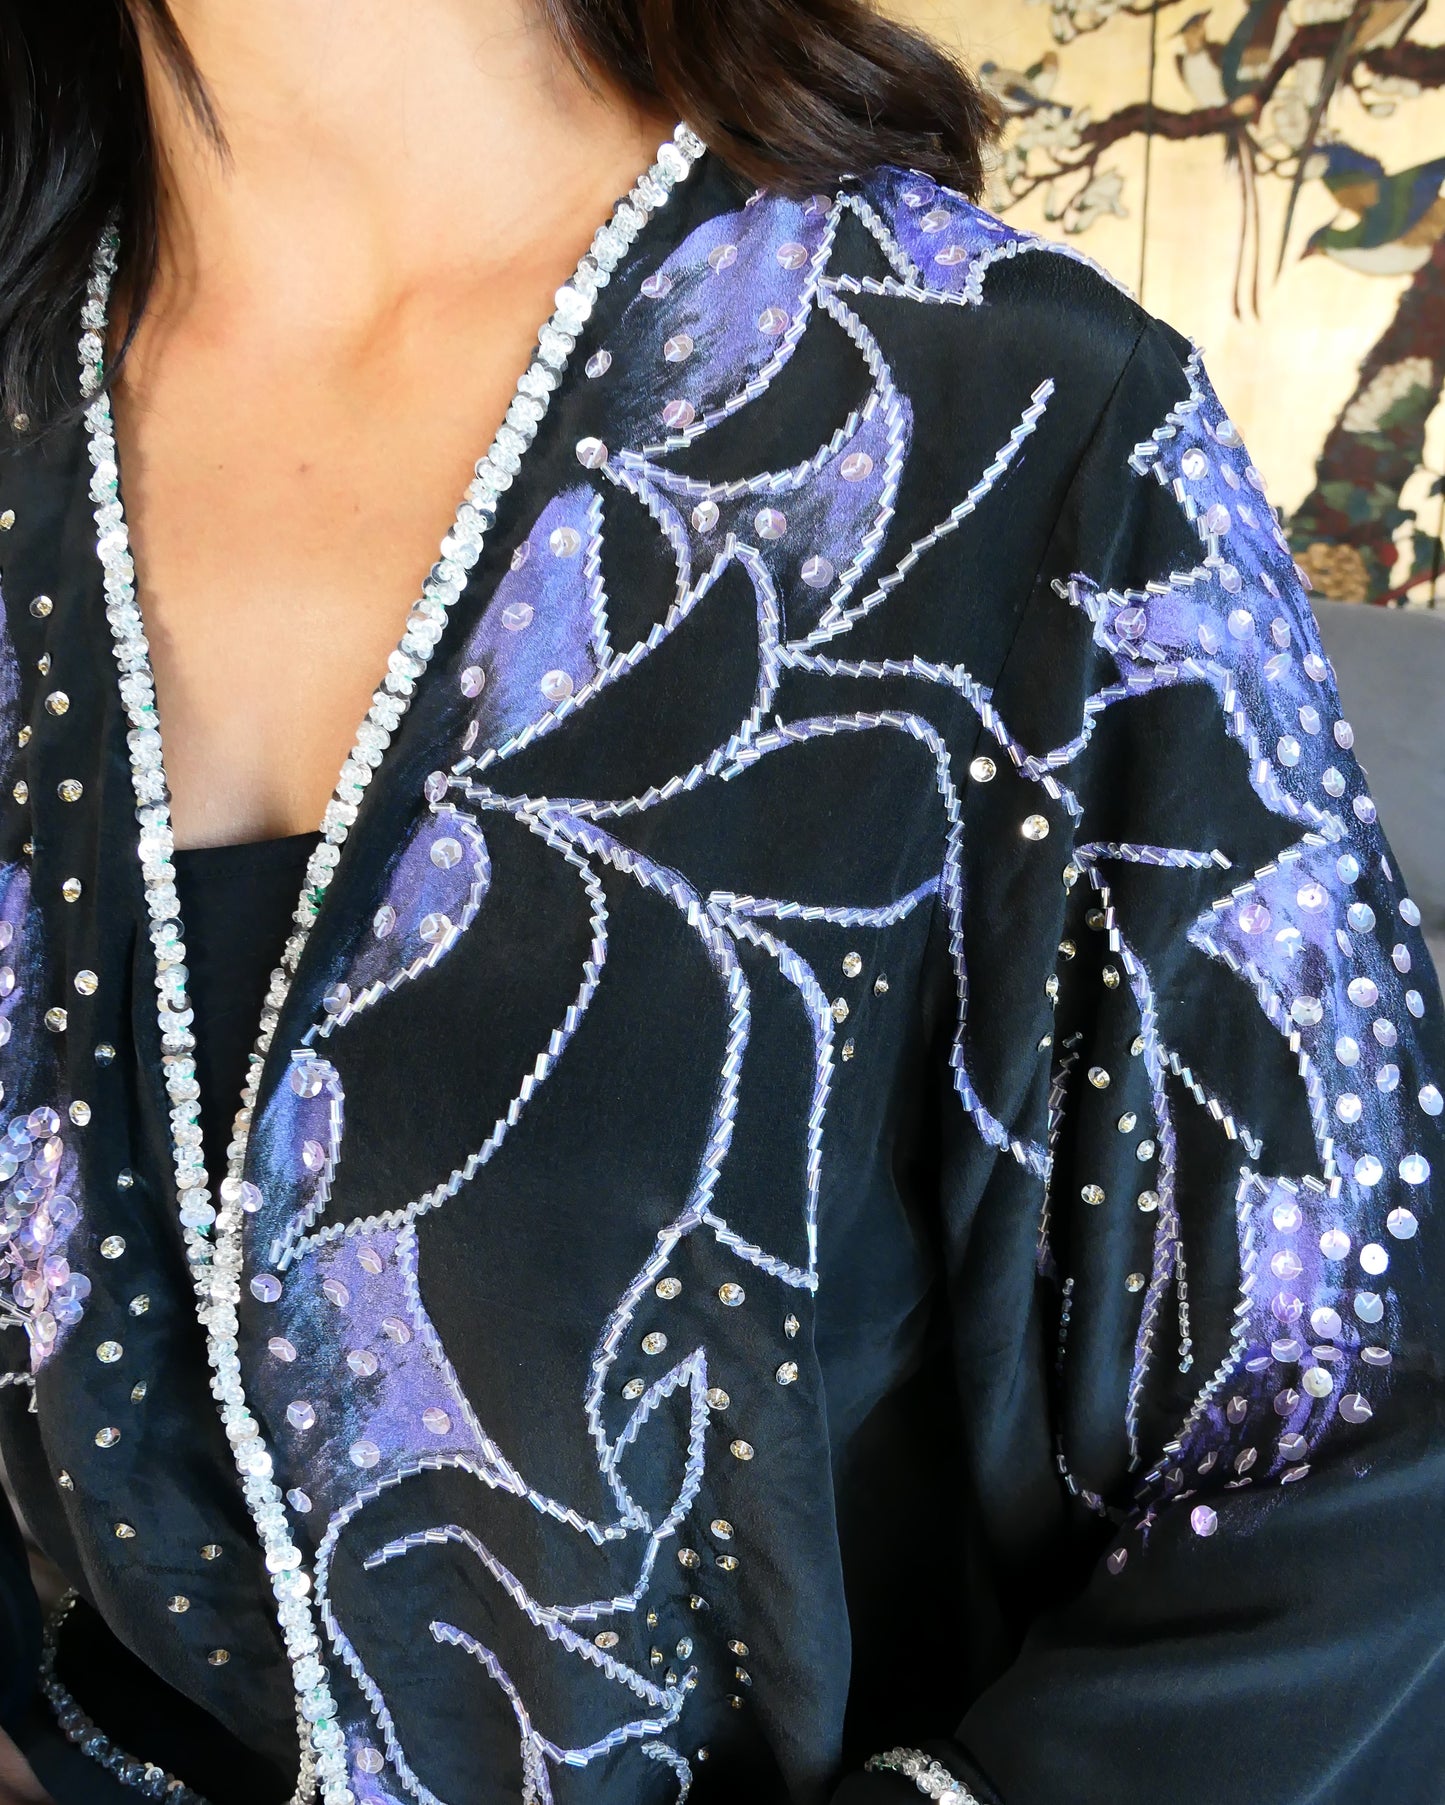 Silk jacket with lavender purple hand-painted flowers and sequins